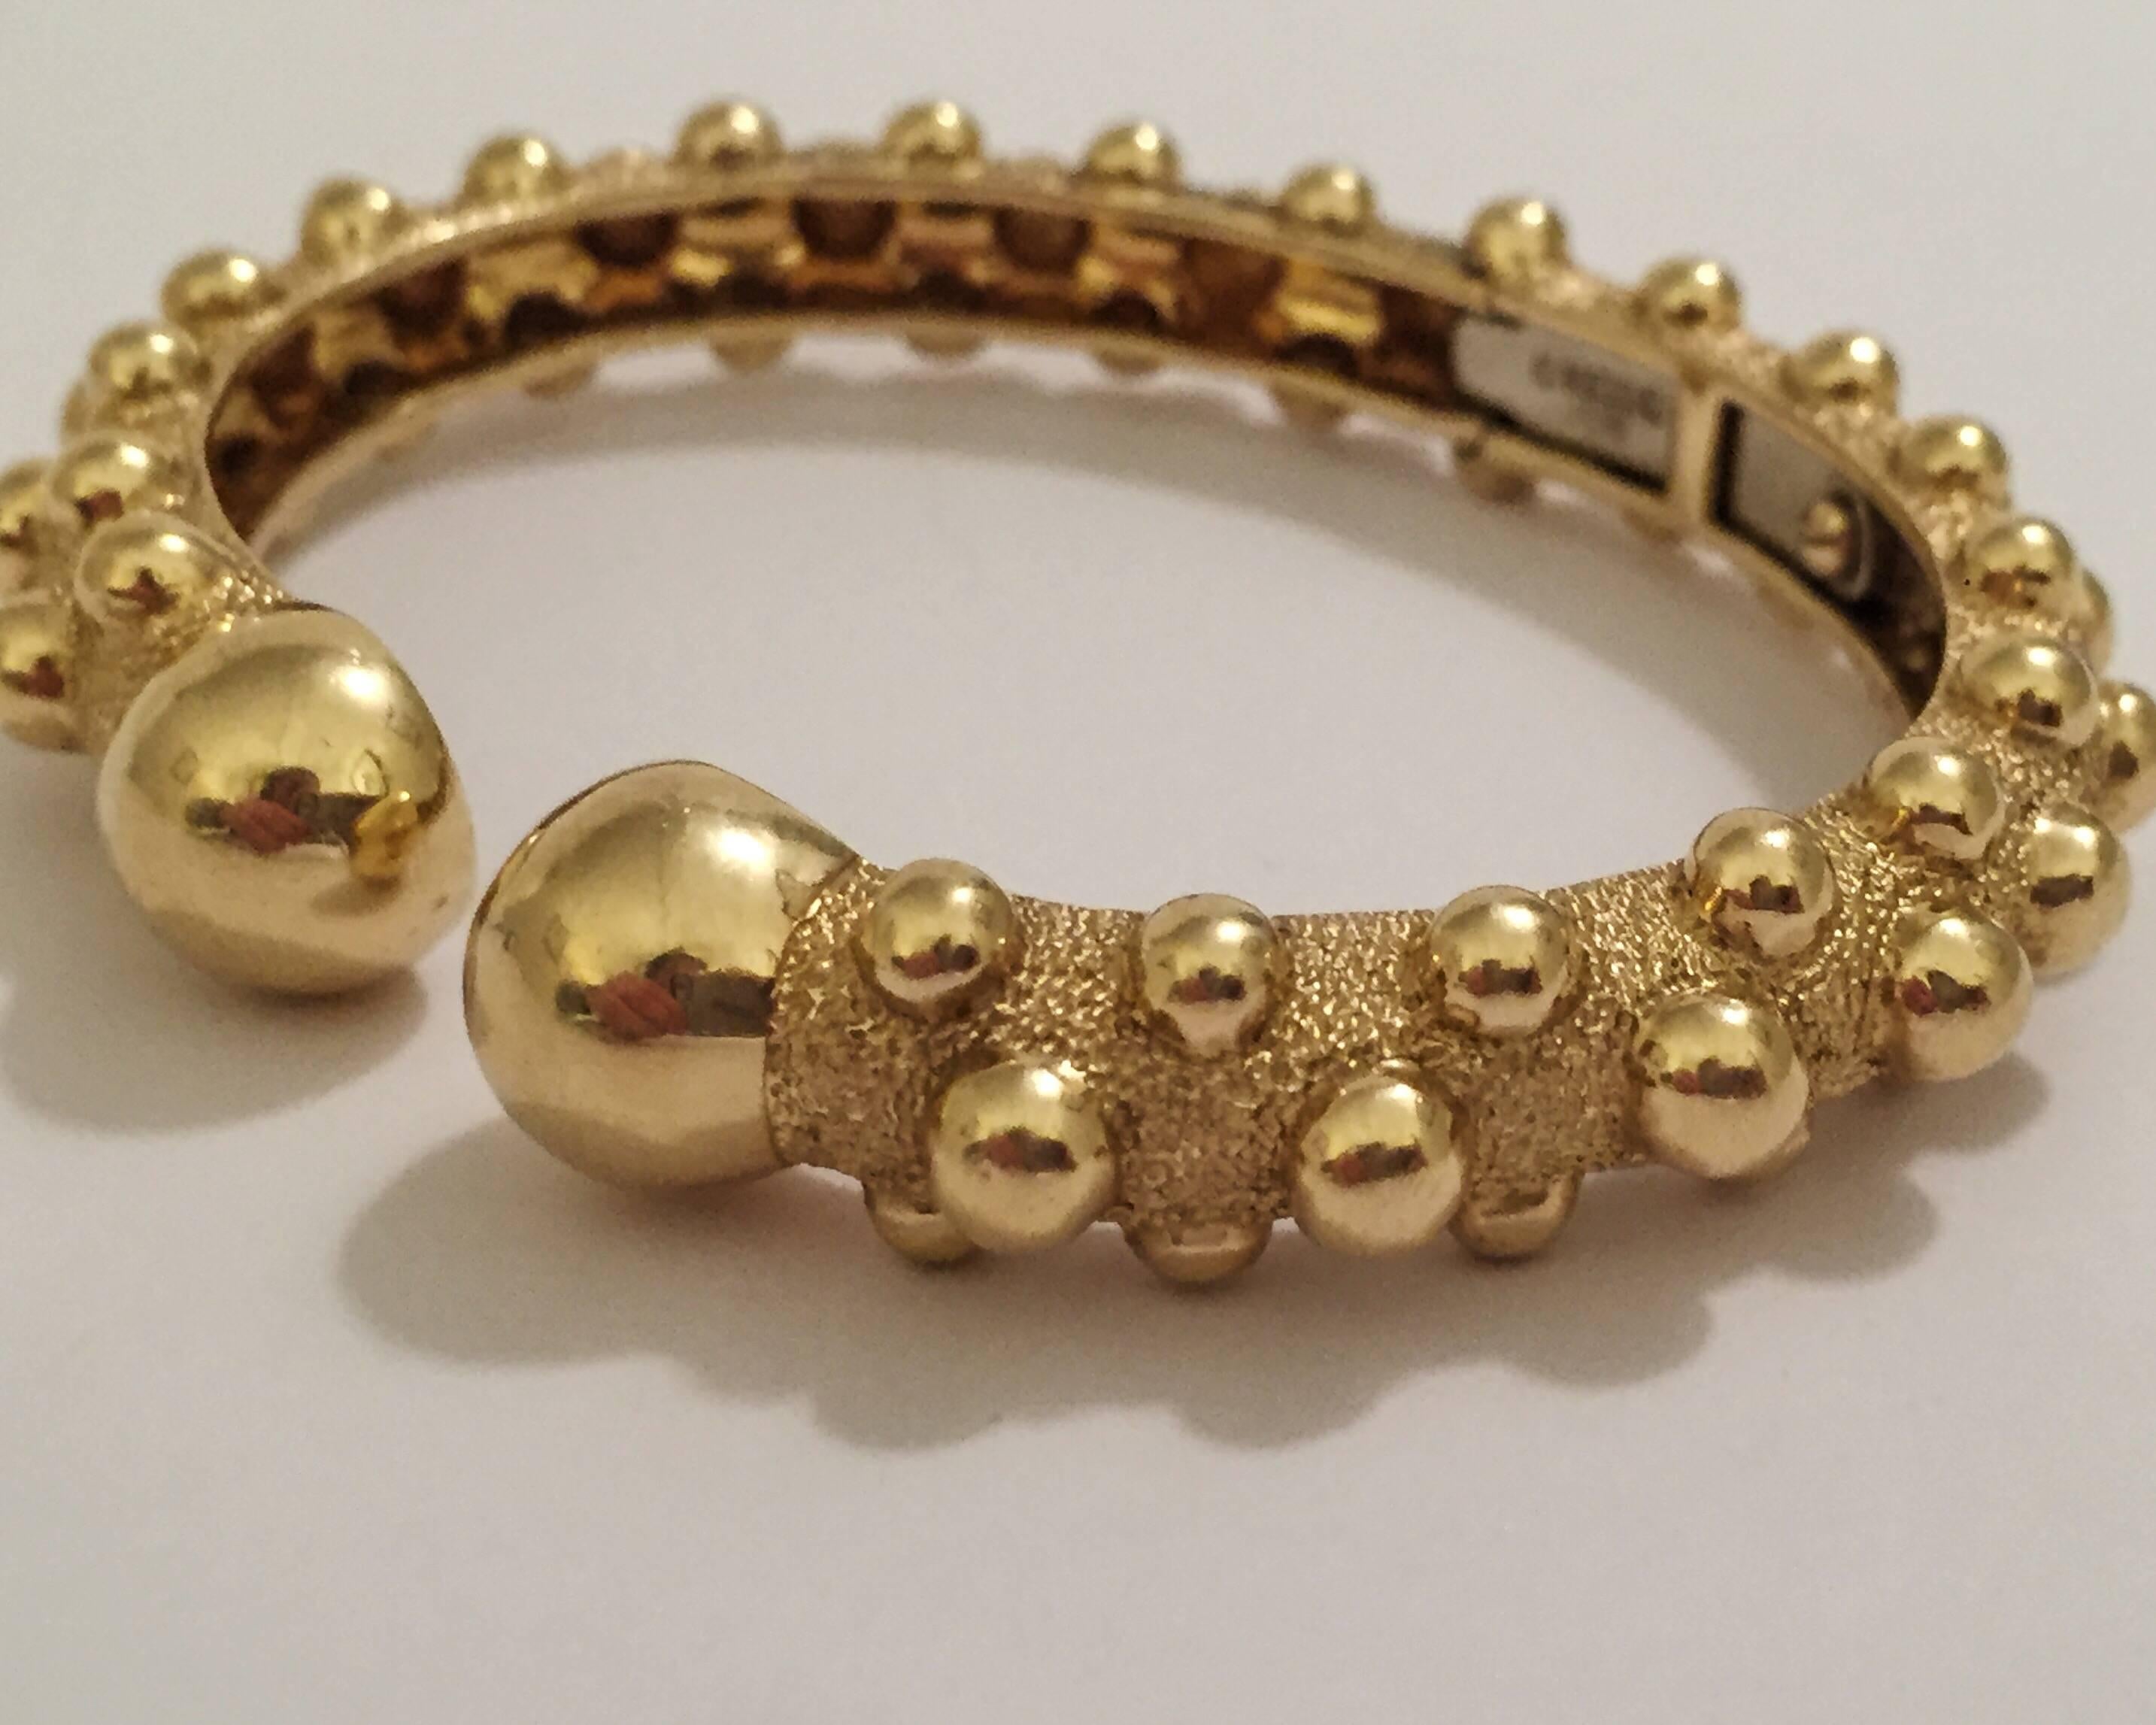 18kt Yellow Gold David Webb Gold hinged Cuff with beaded detail.  The open Cuff hinges in the middle.  The polished gold beading detail is completed with the large gold beaded ends of the cuff.

The cuff is small and measures 2 1/4